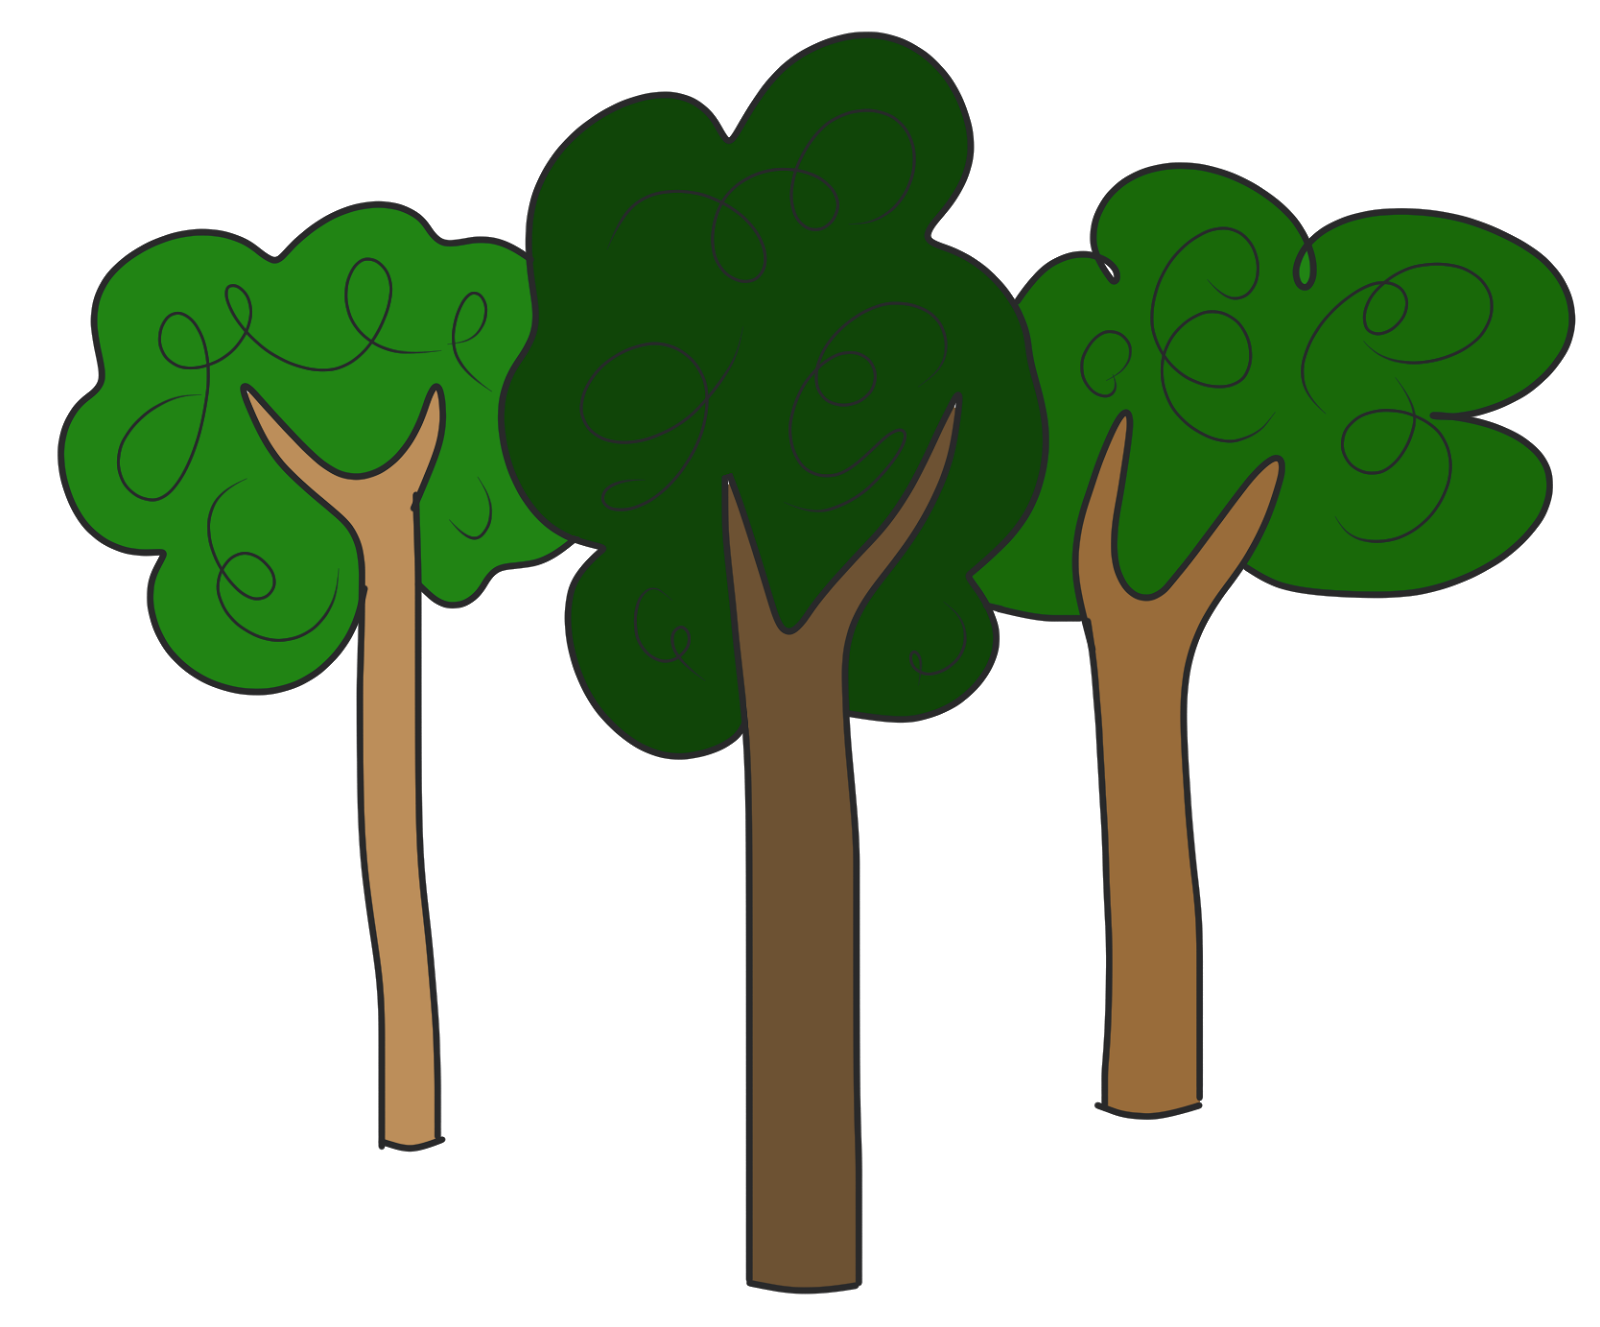 House at getdrawings com. Clipart computer tree